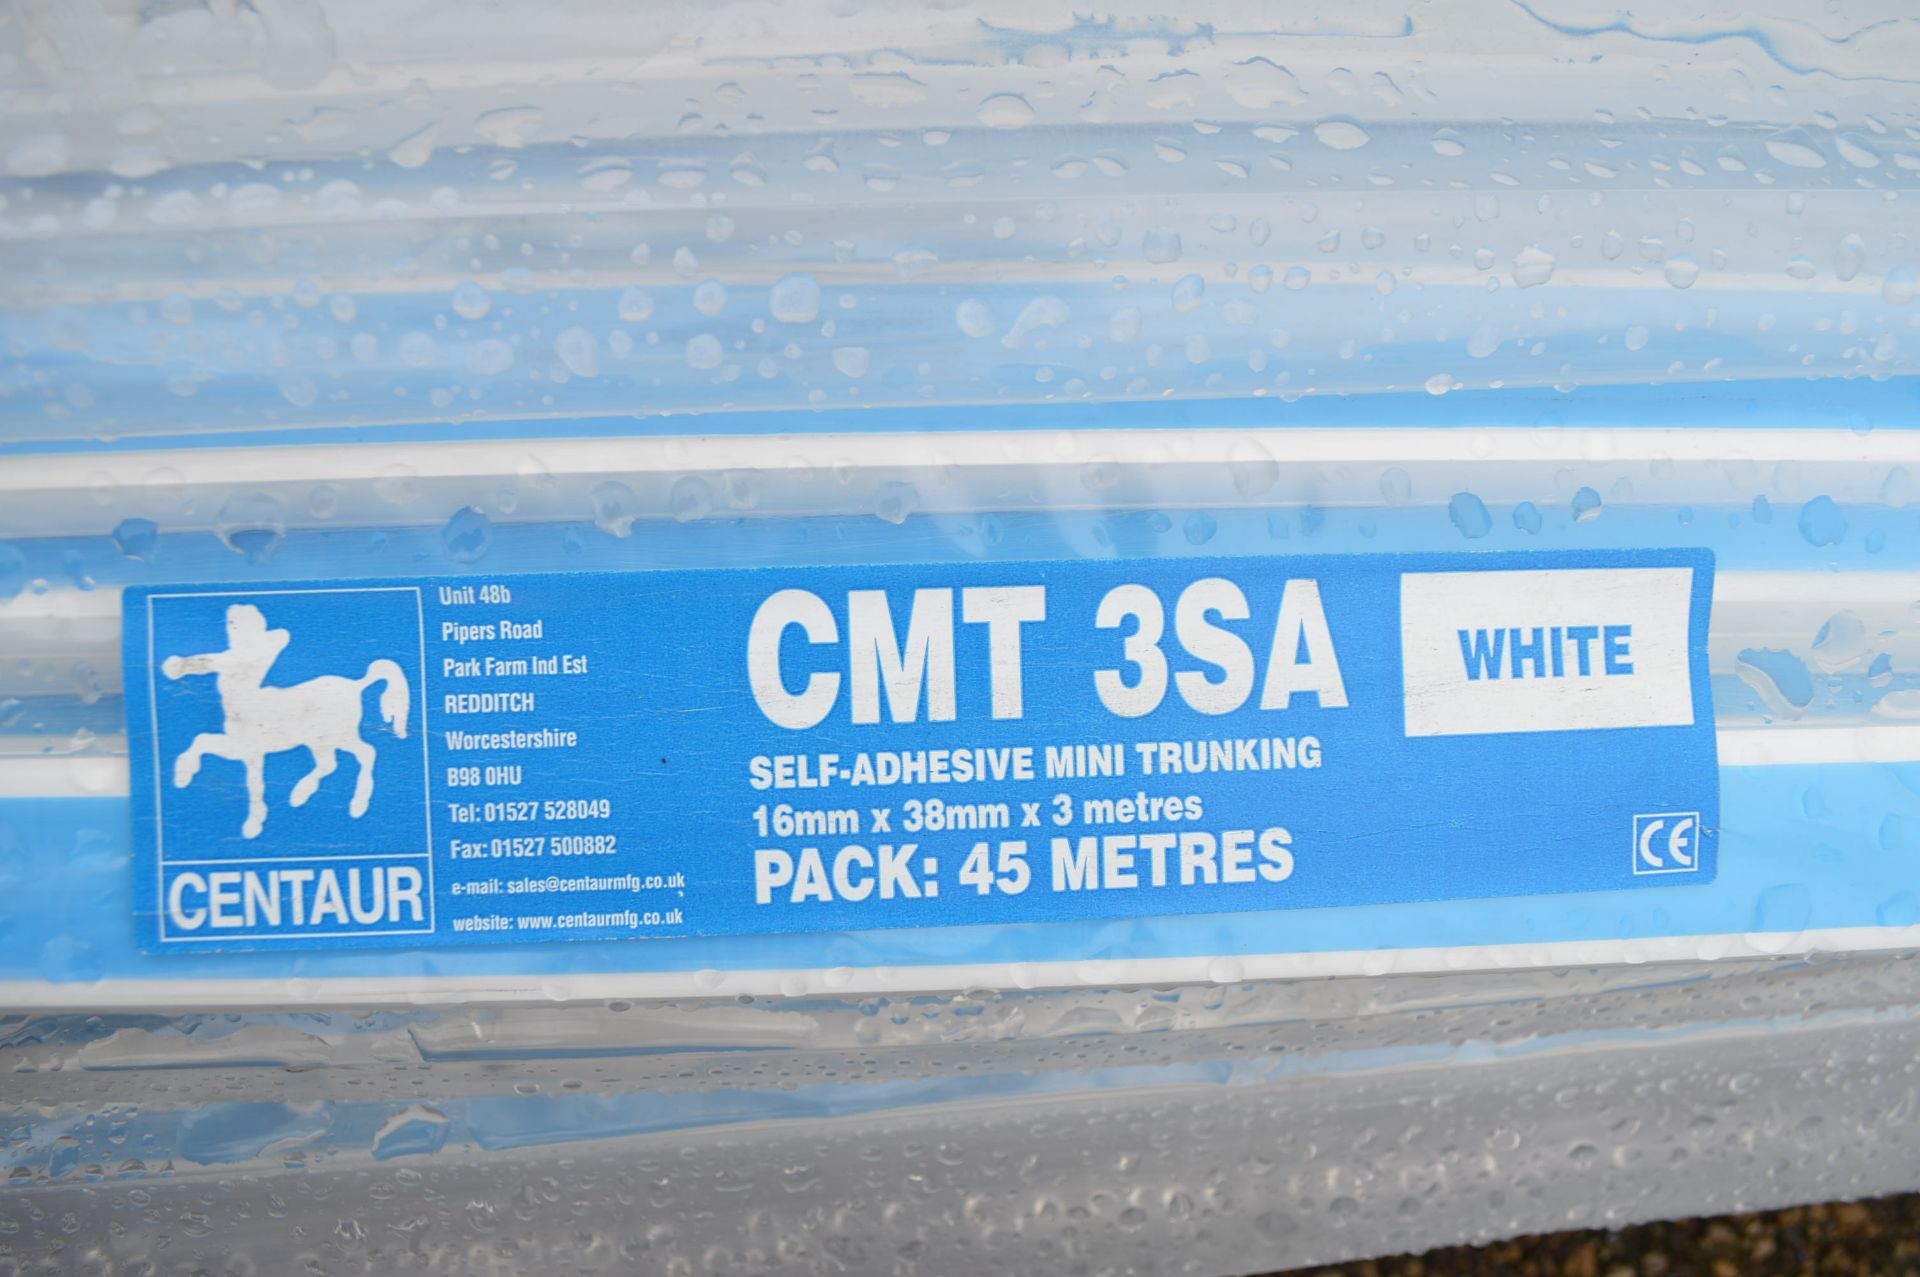 675 METRES OF SELF-ADHESIVE MINI TRUNKING WHITE   CMT 3SA 16MM X 38MM X 3 METRES PACK: 45 METRES - Image 3 of 5